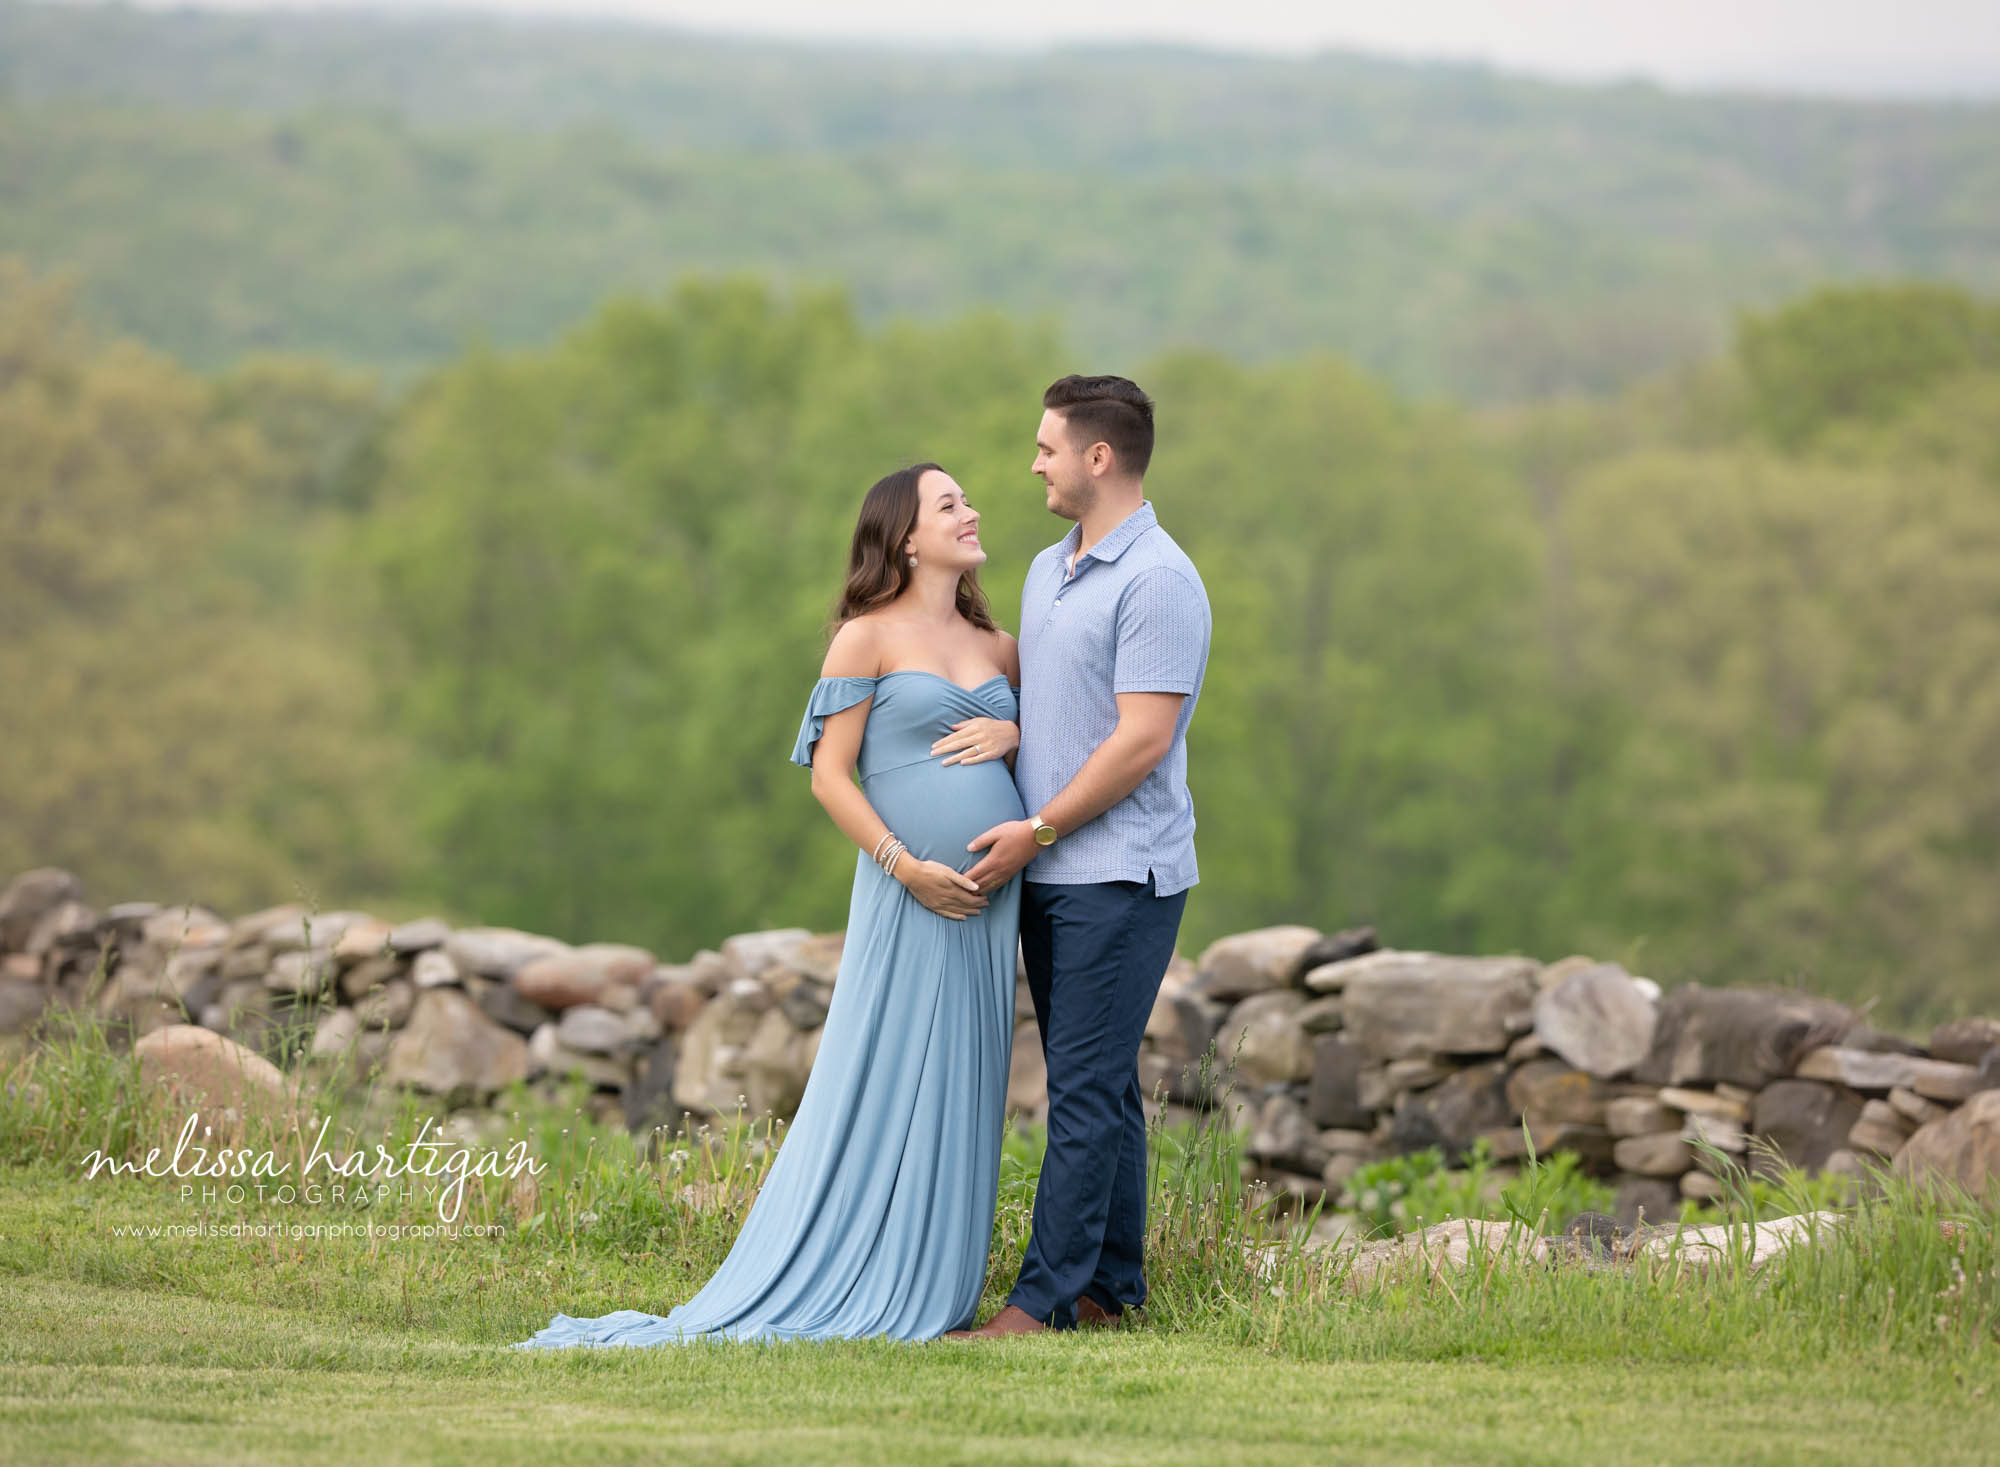 couple holding baby bump in connecticut park during maternity photoshoot